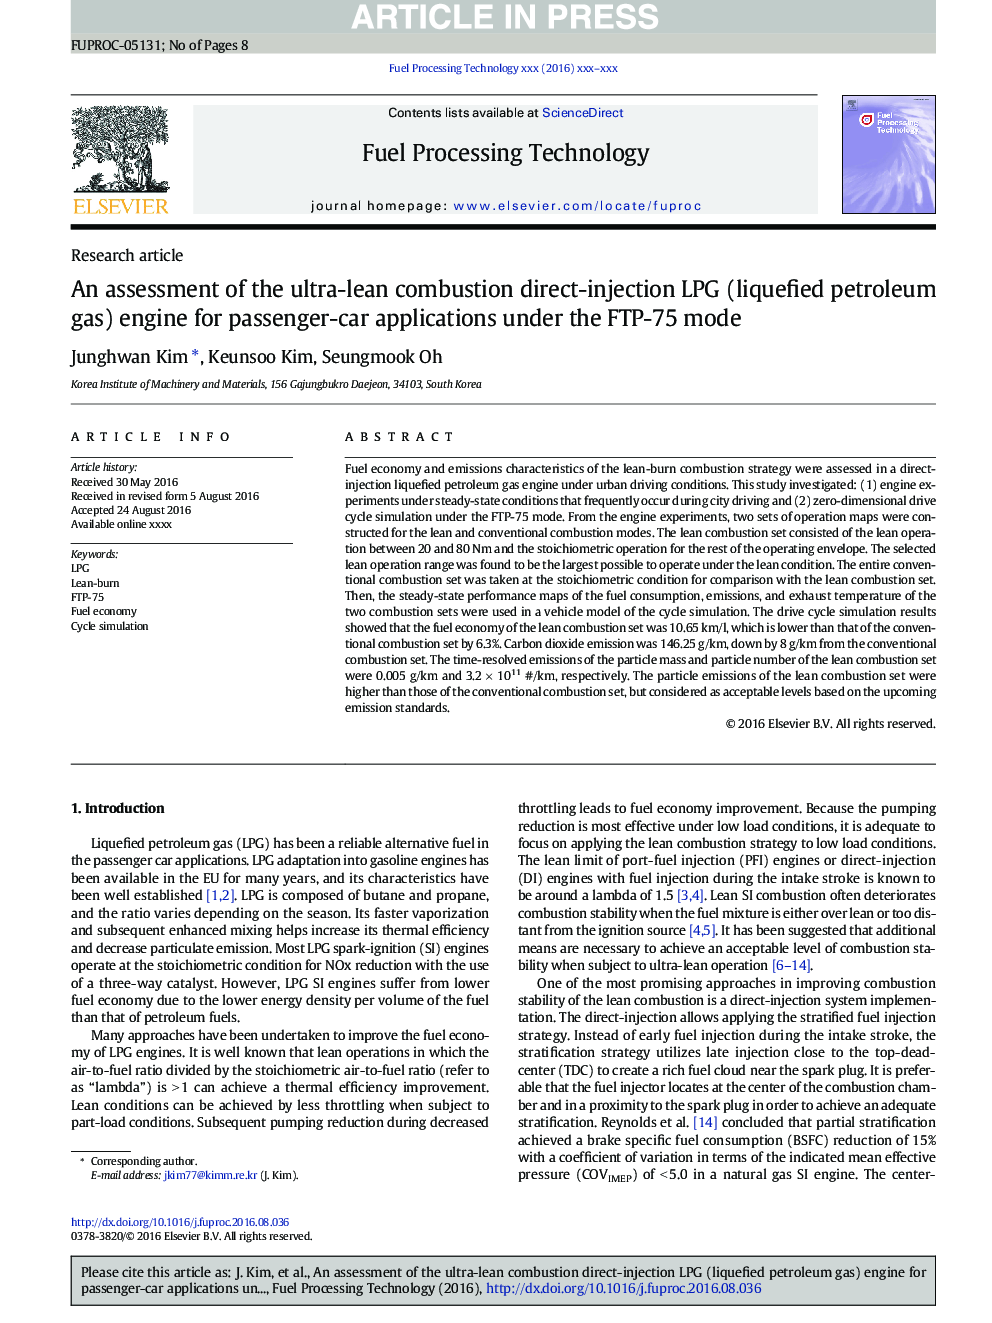 An assessment of the ultra-lean combustion direct-injection LPG (liquefied petroleum gas) engine for passenger-car applications under the FTP-75 mode